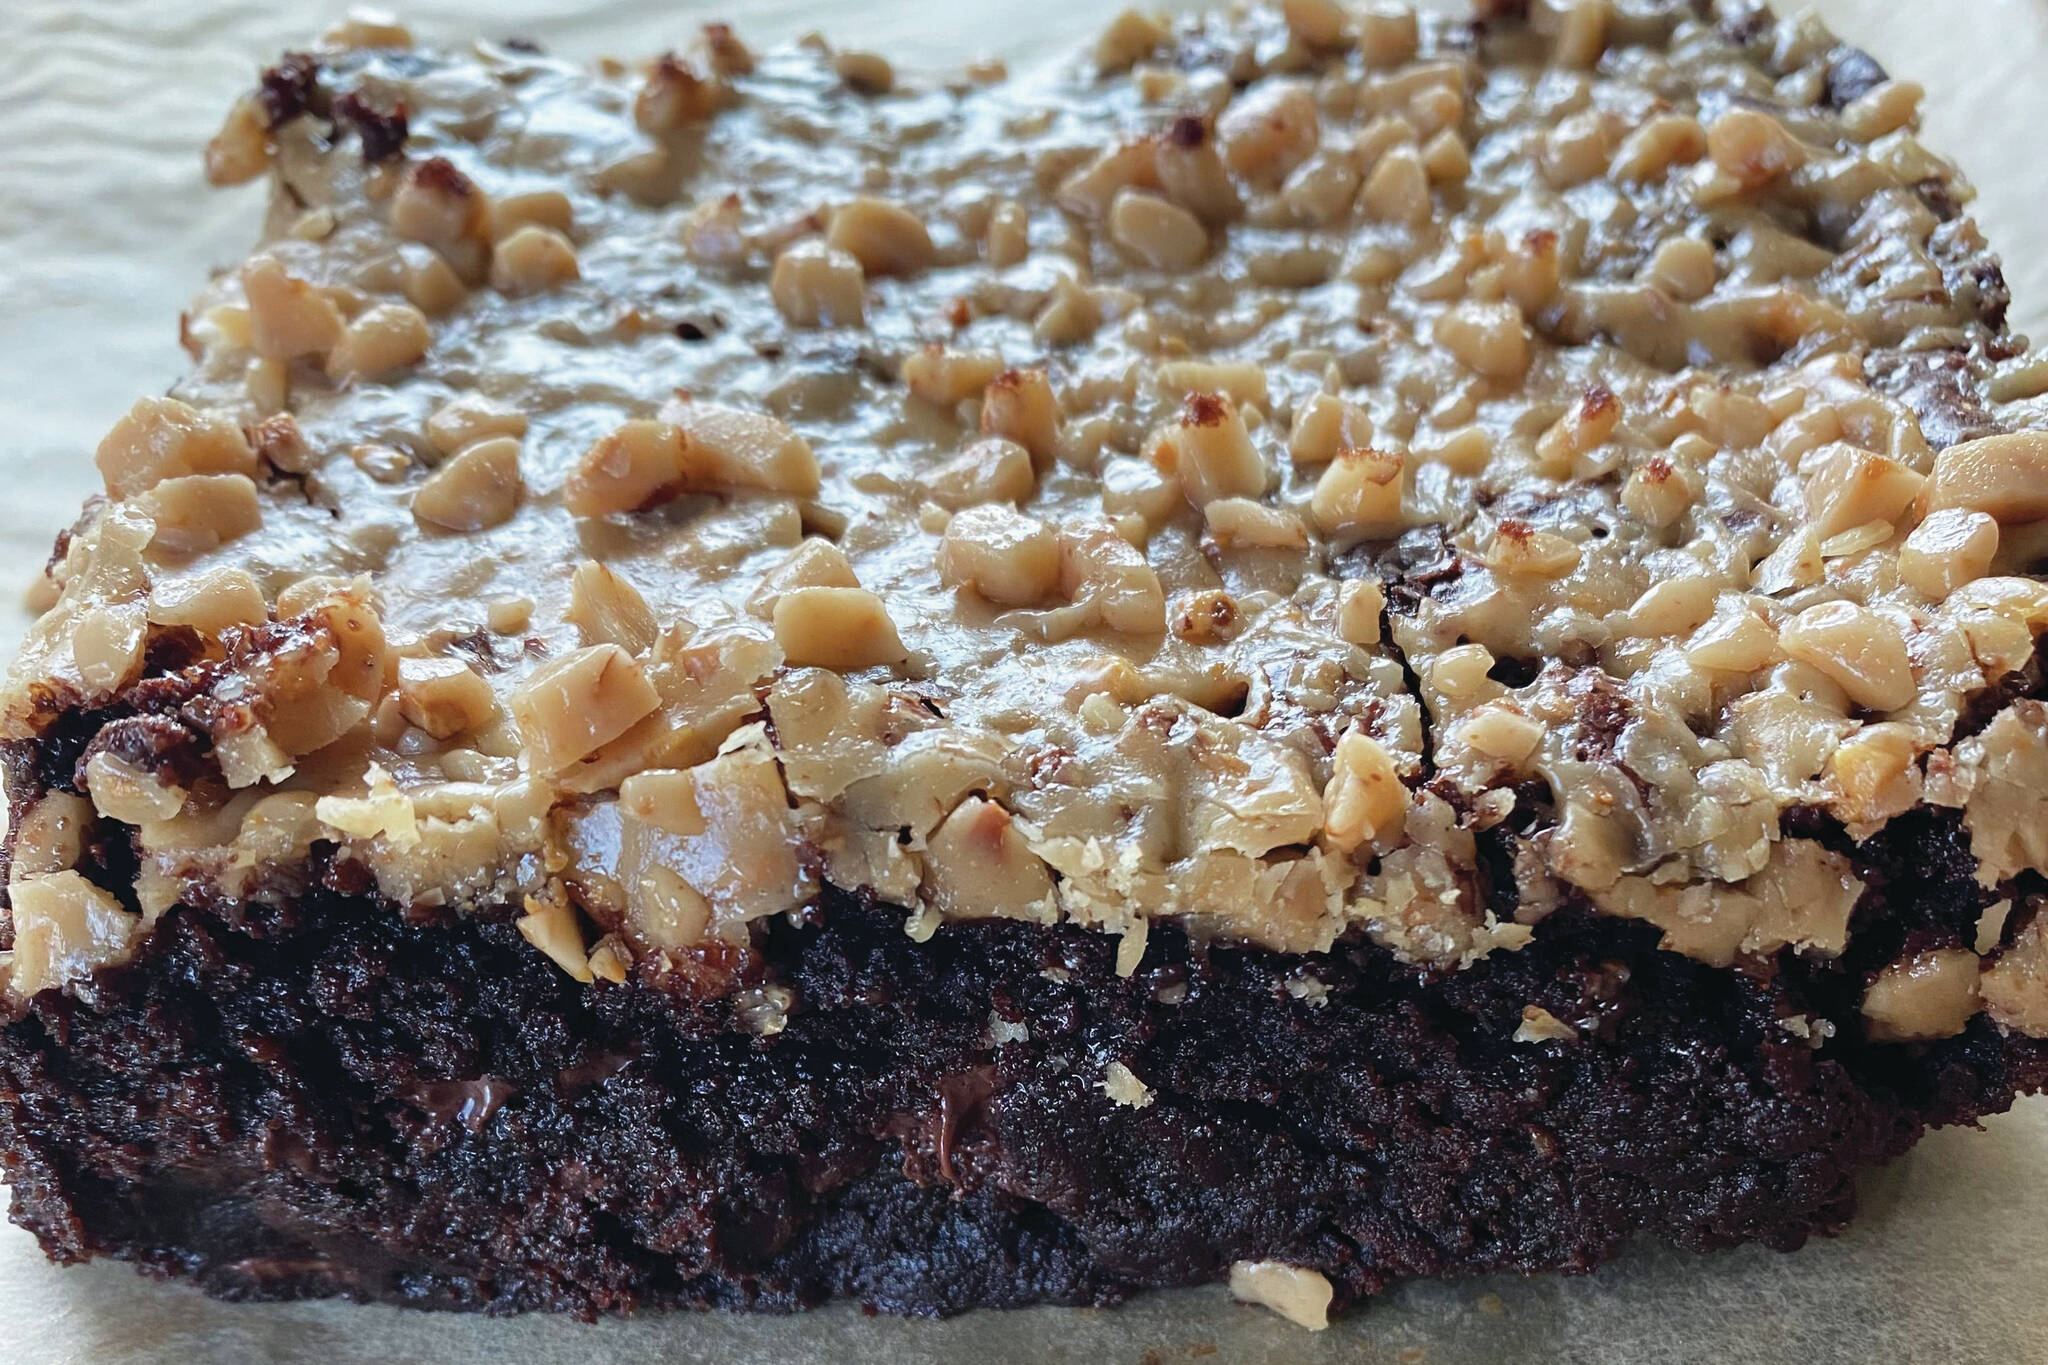 These dark and decadent chocolate brownies have a crunchy toffee topping. (Photo by Tressa Dale/Peninsula Clarion)